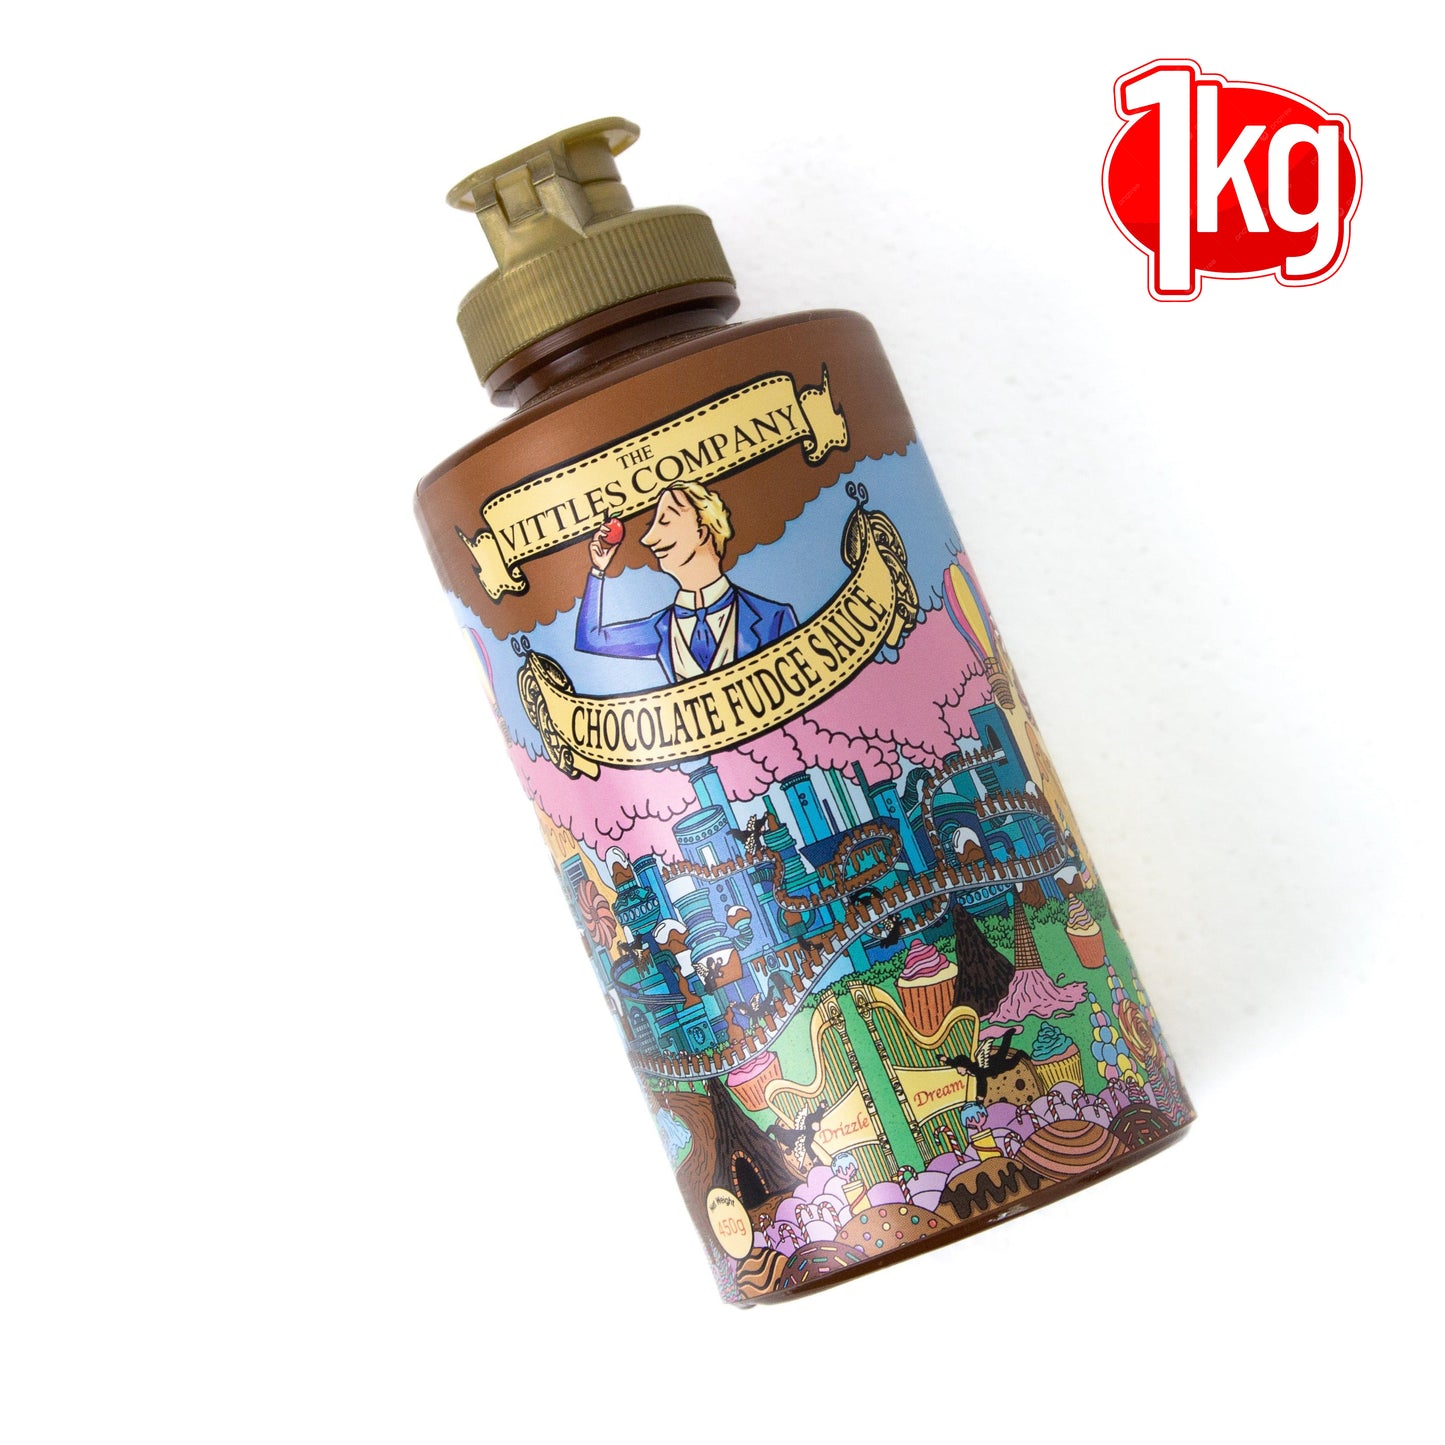 The Vittles Company - Chocolate Fudge - Flavored Sauce - 1000g (1 KG)